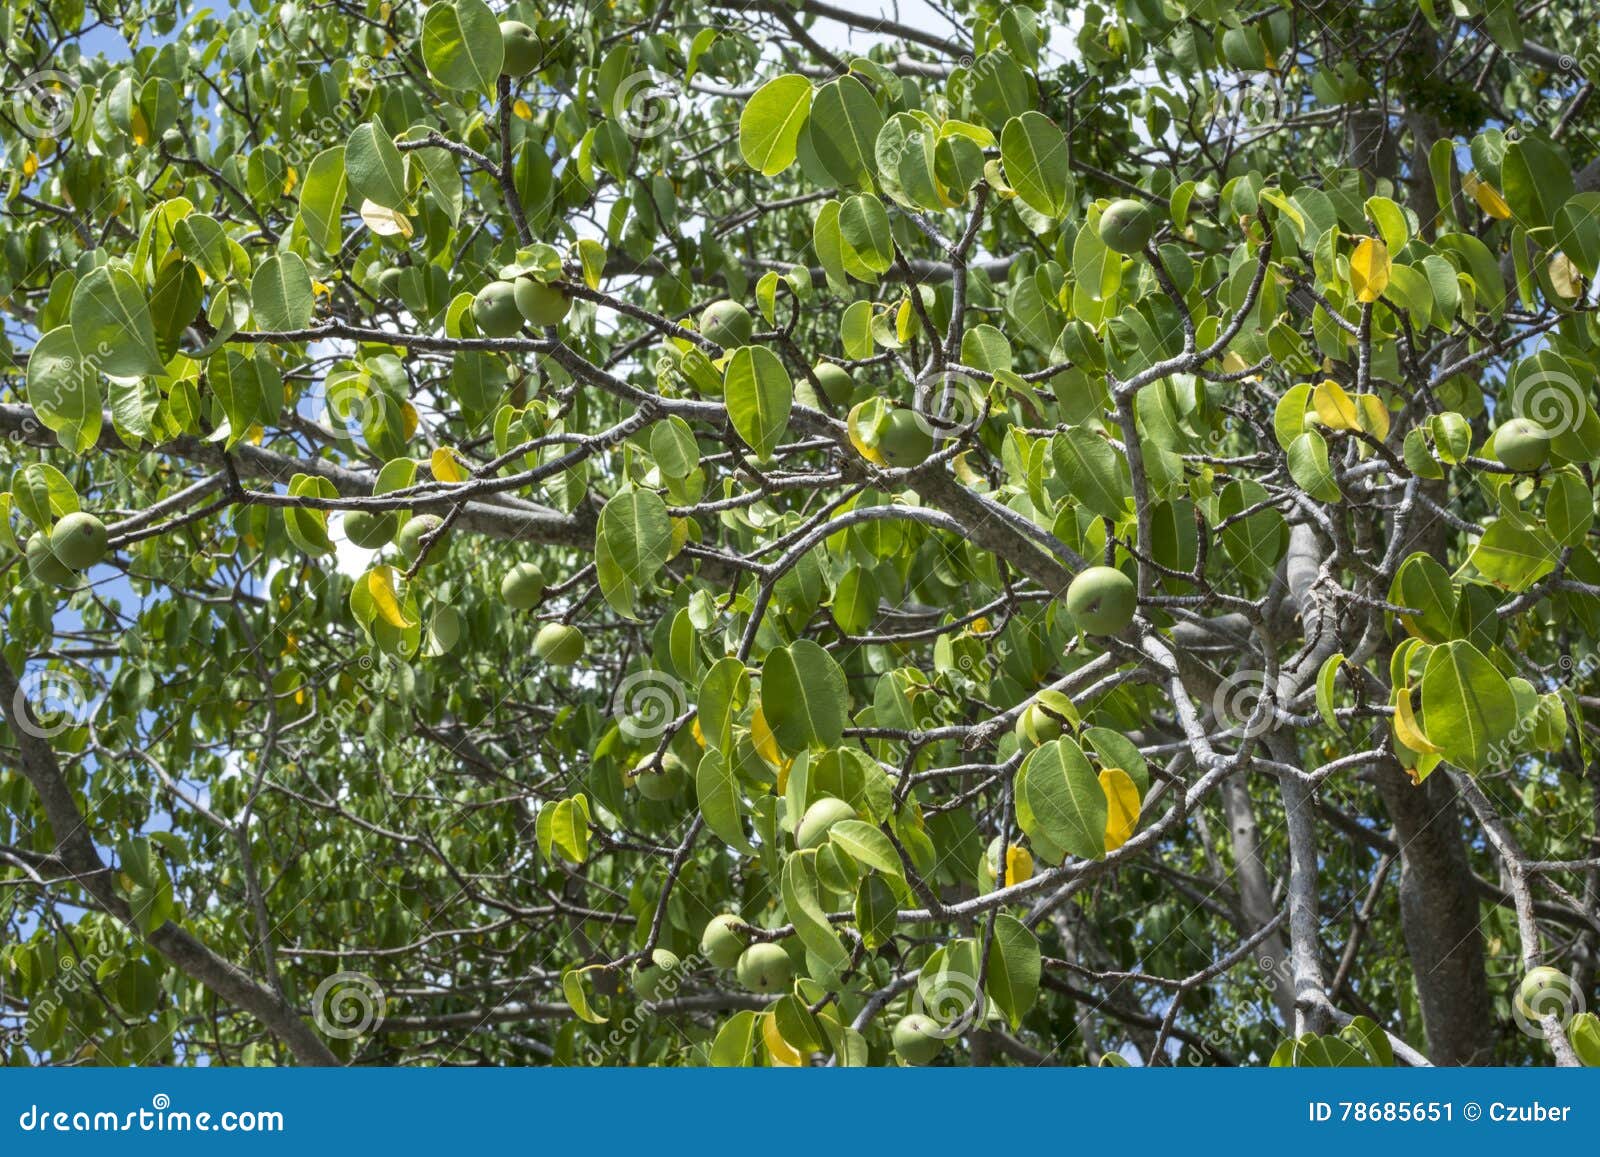 deadly manchineel tree with fruit